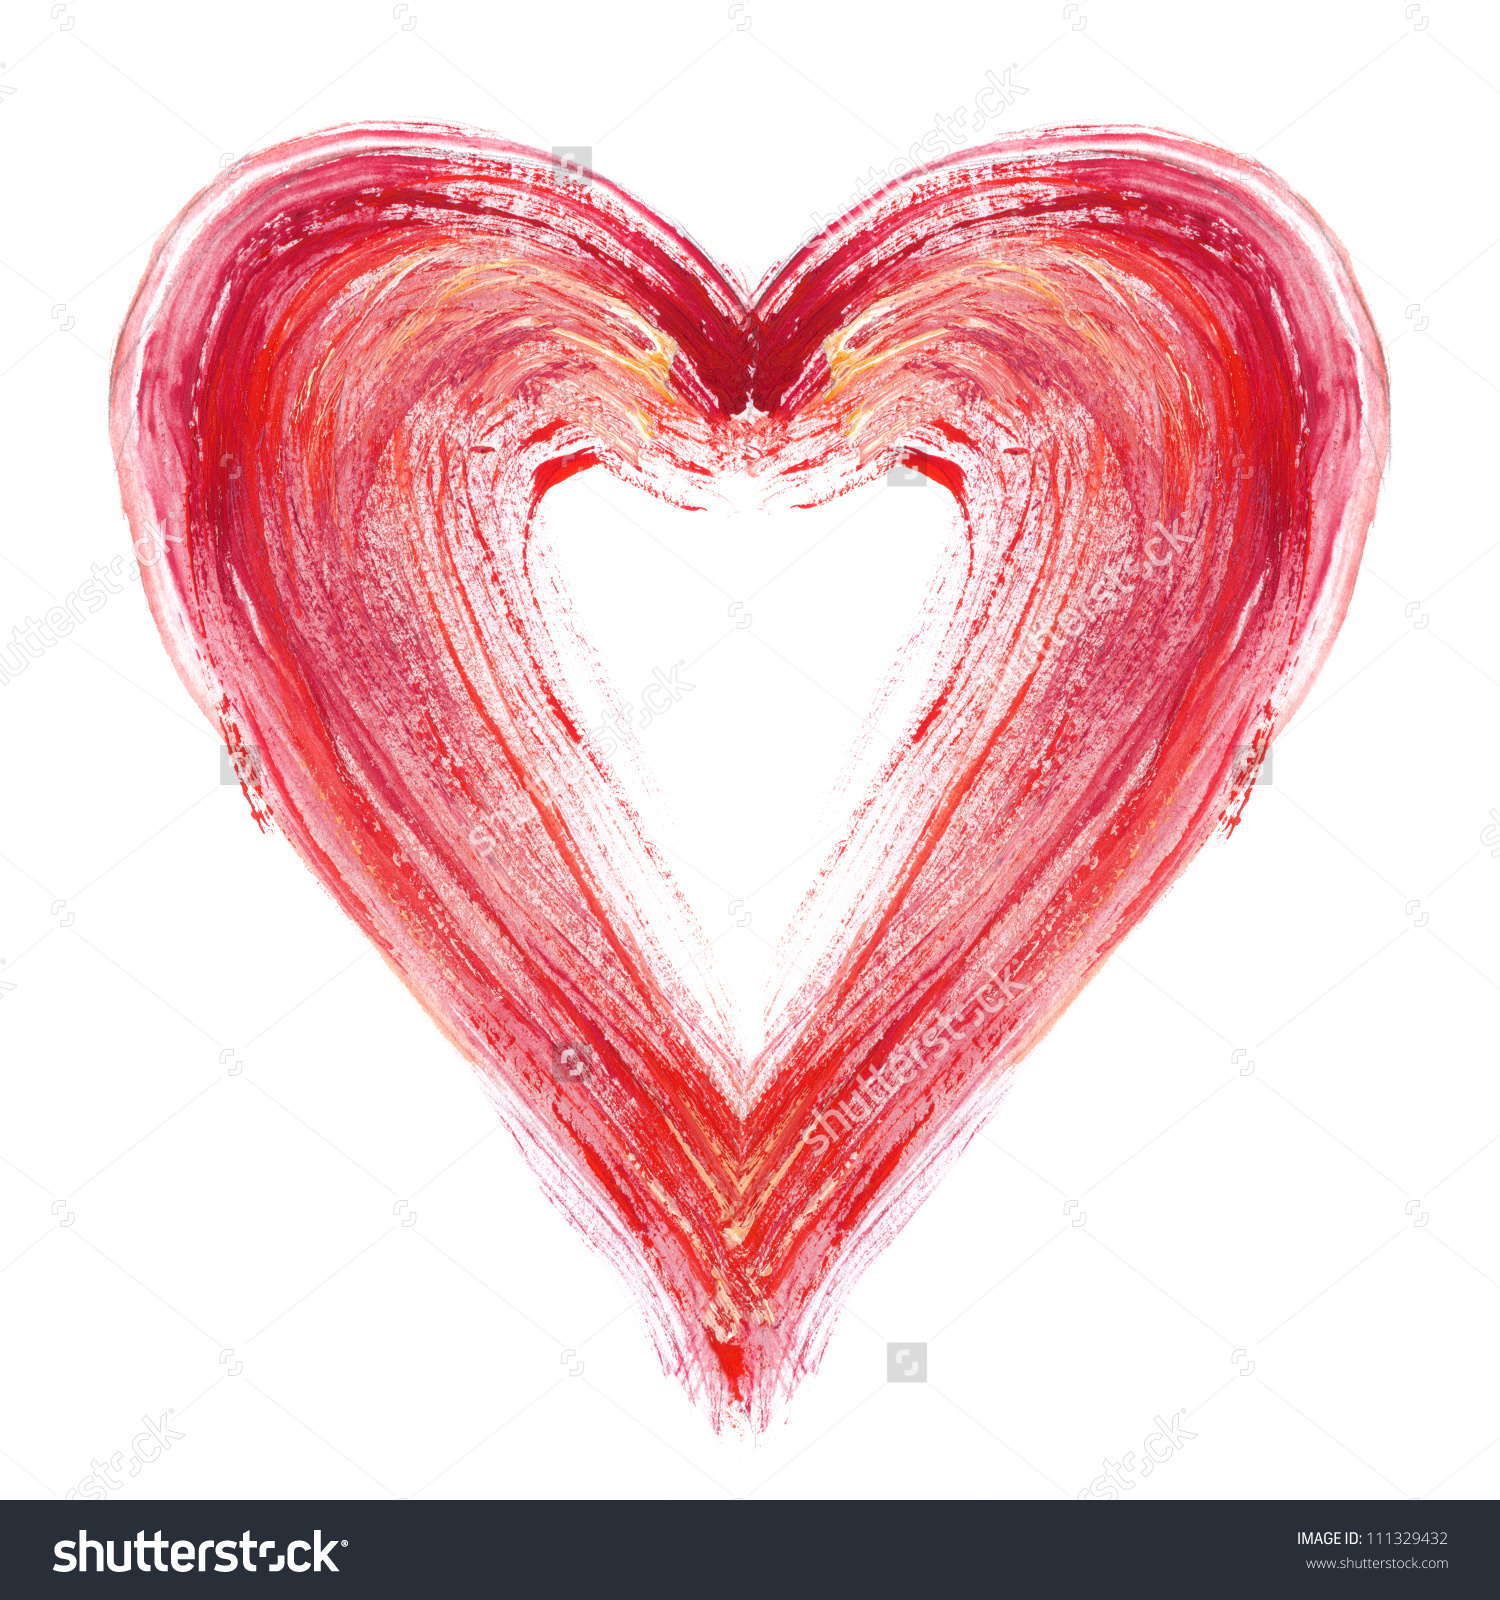 Painted heart photo